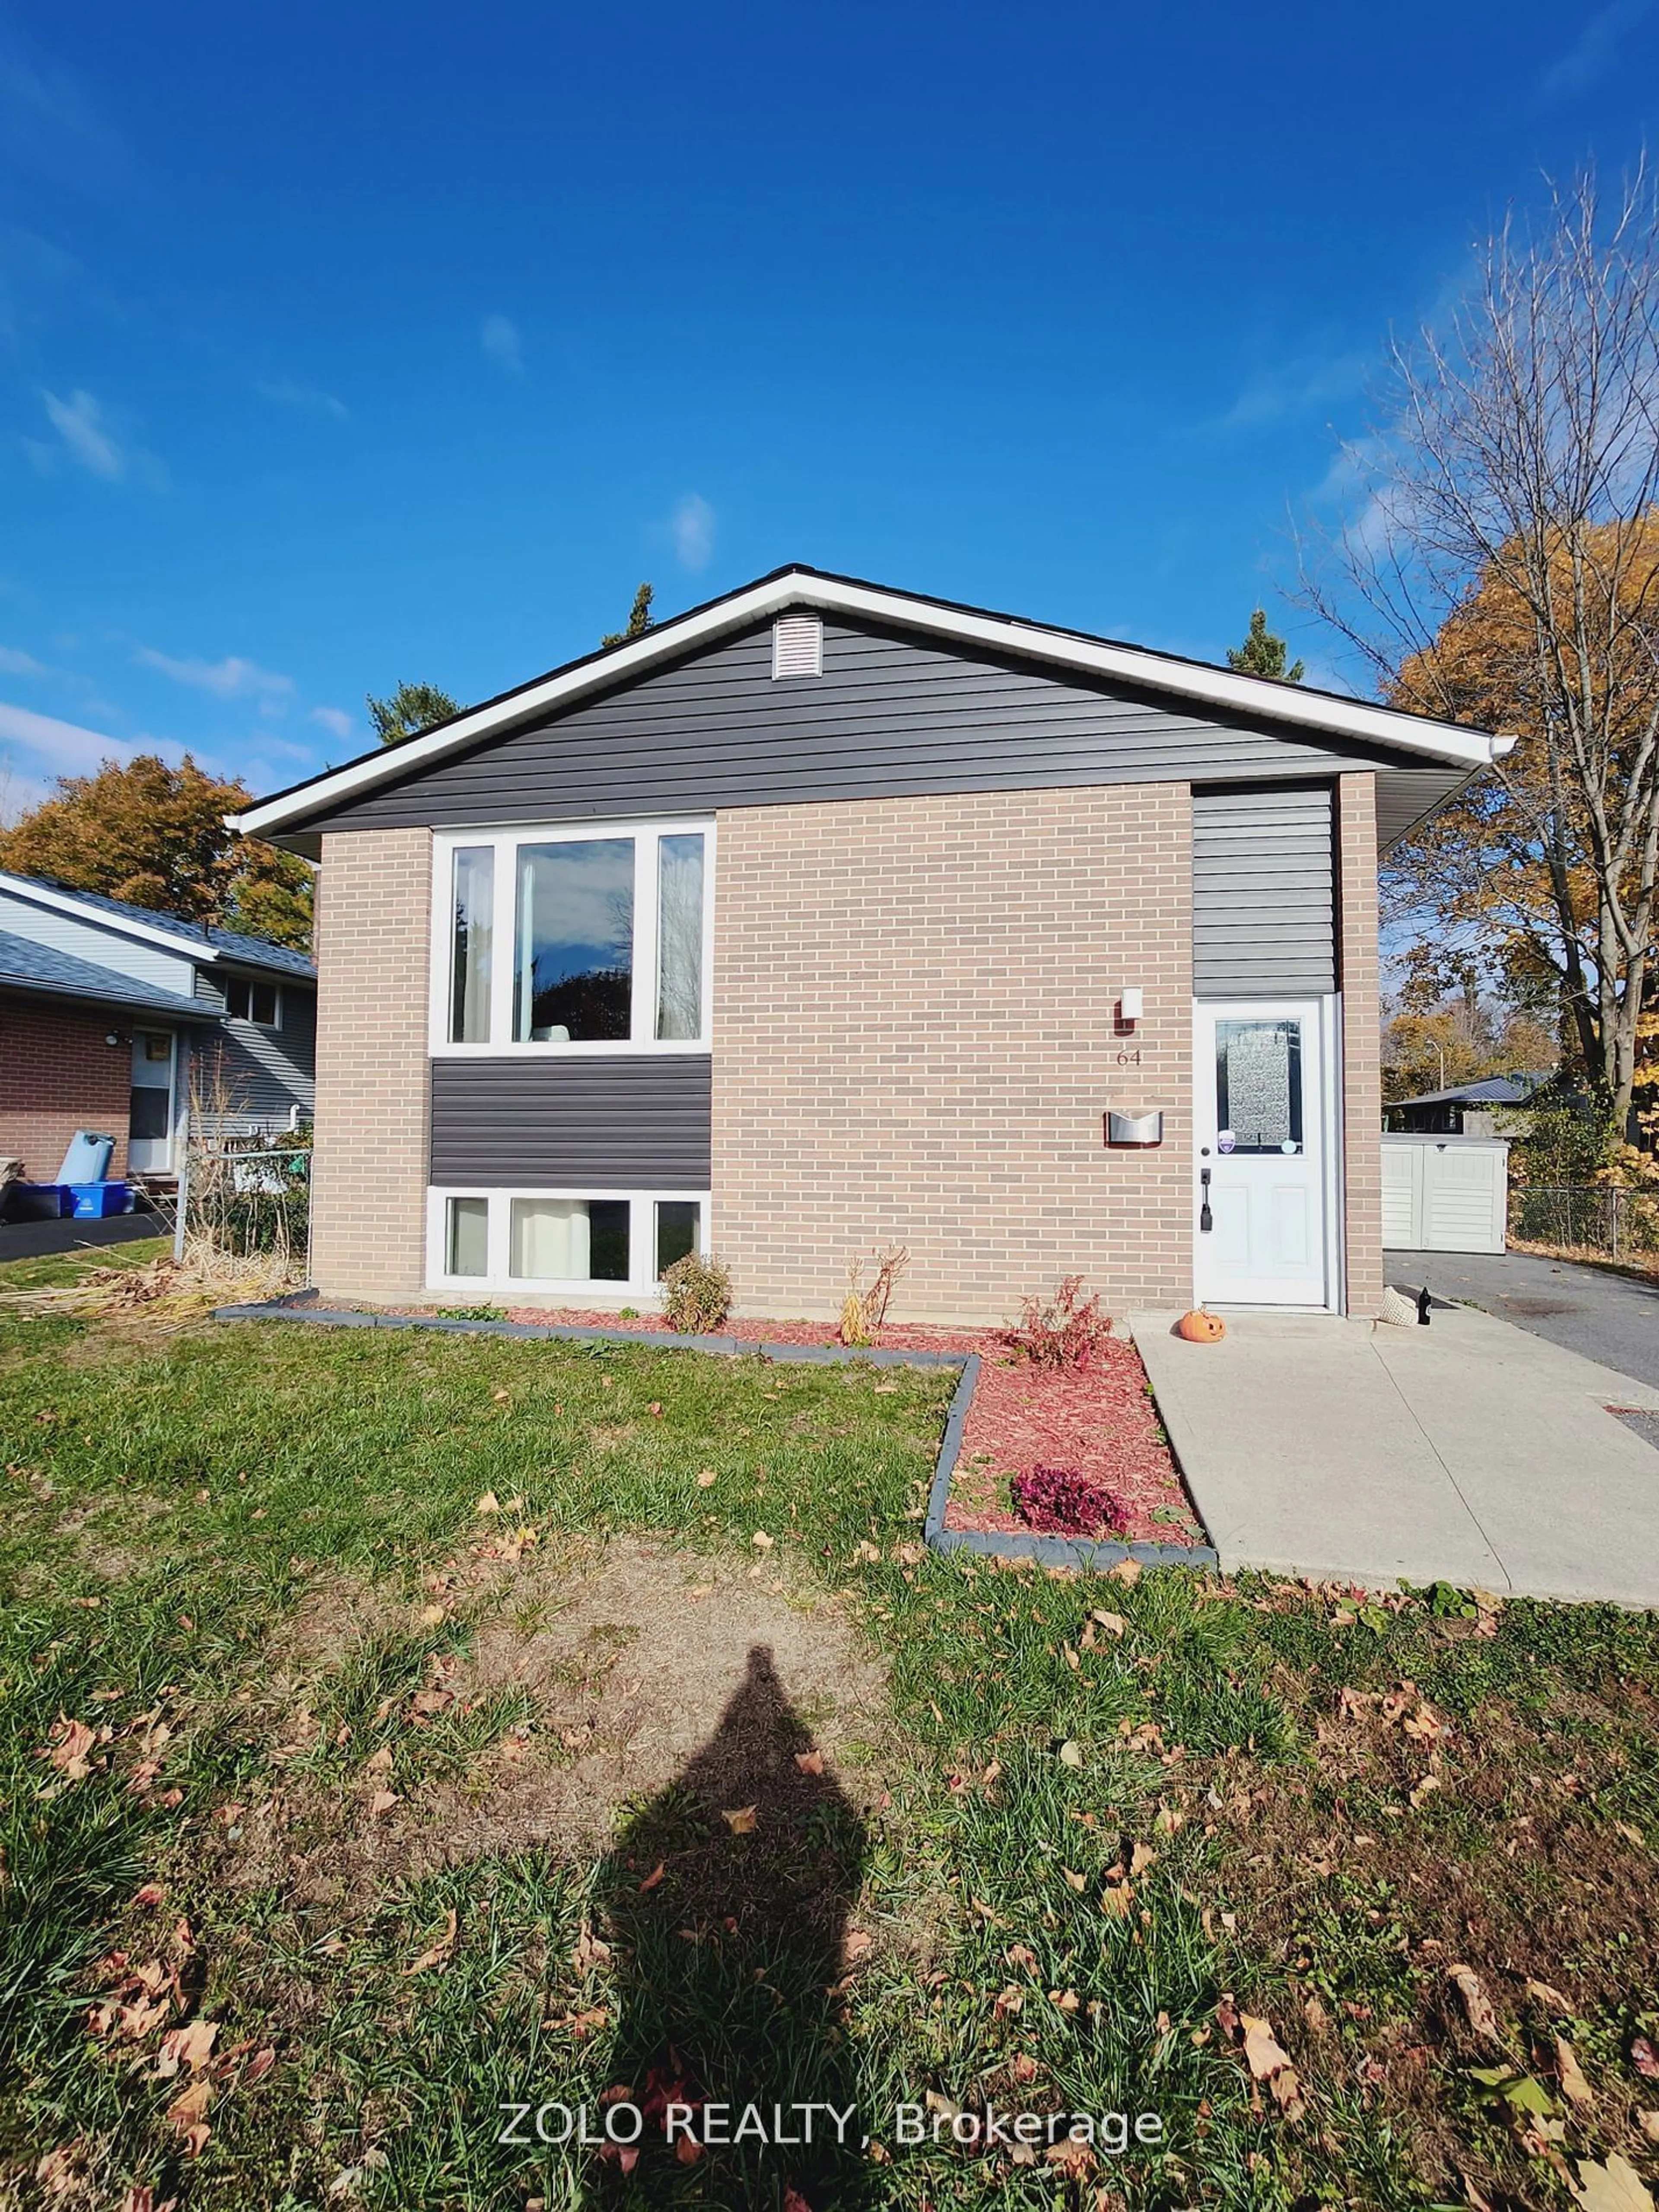 Home with brick exterior material for 64 Woodstone Cres, Kingston Ontario K7M 6K9